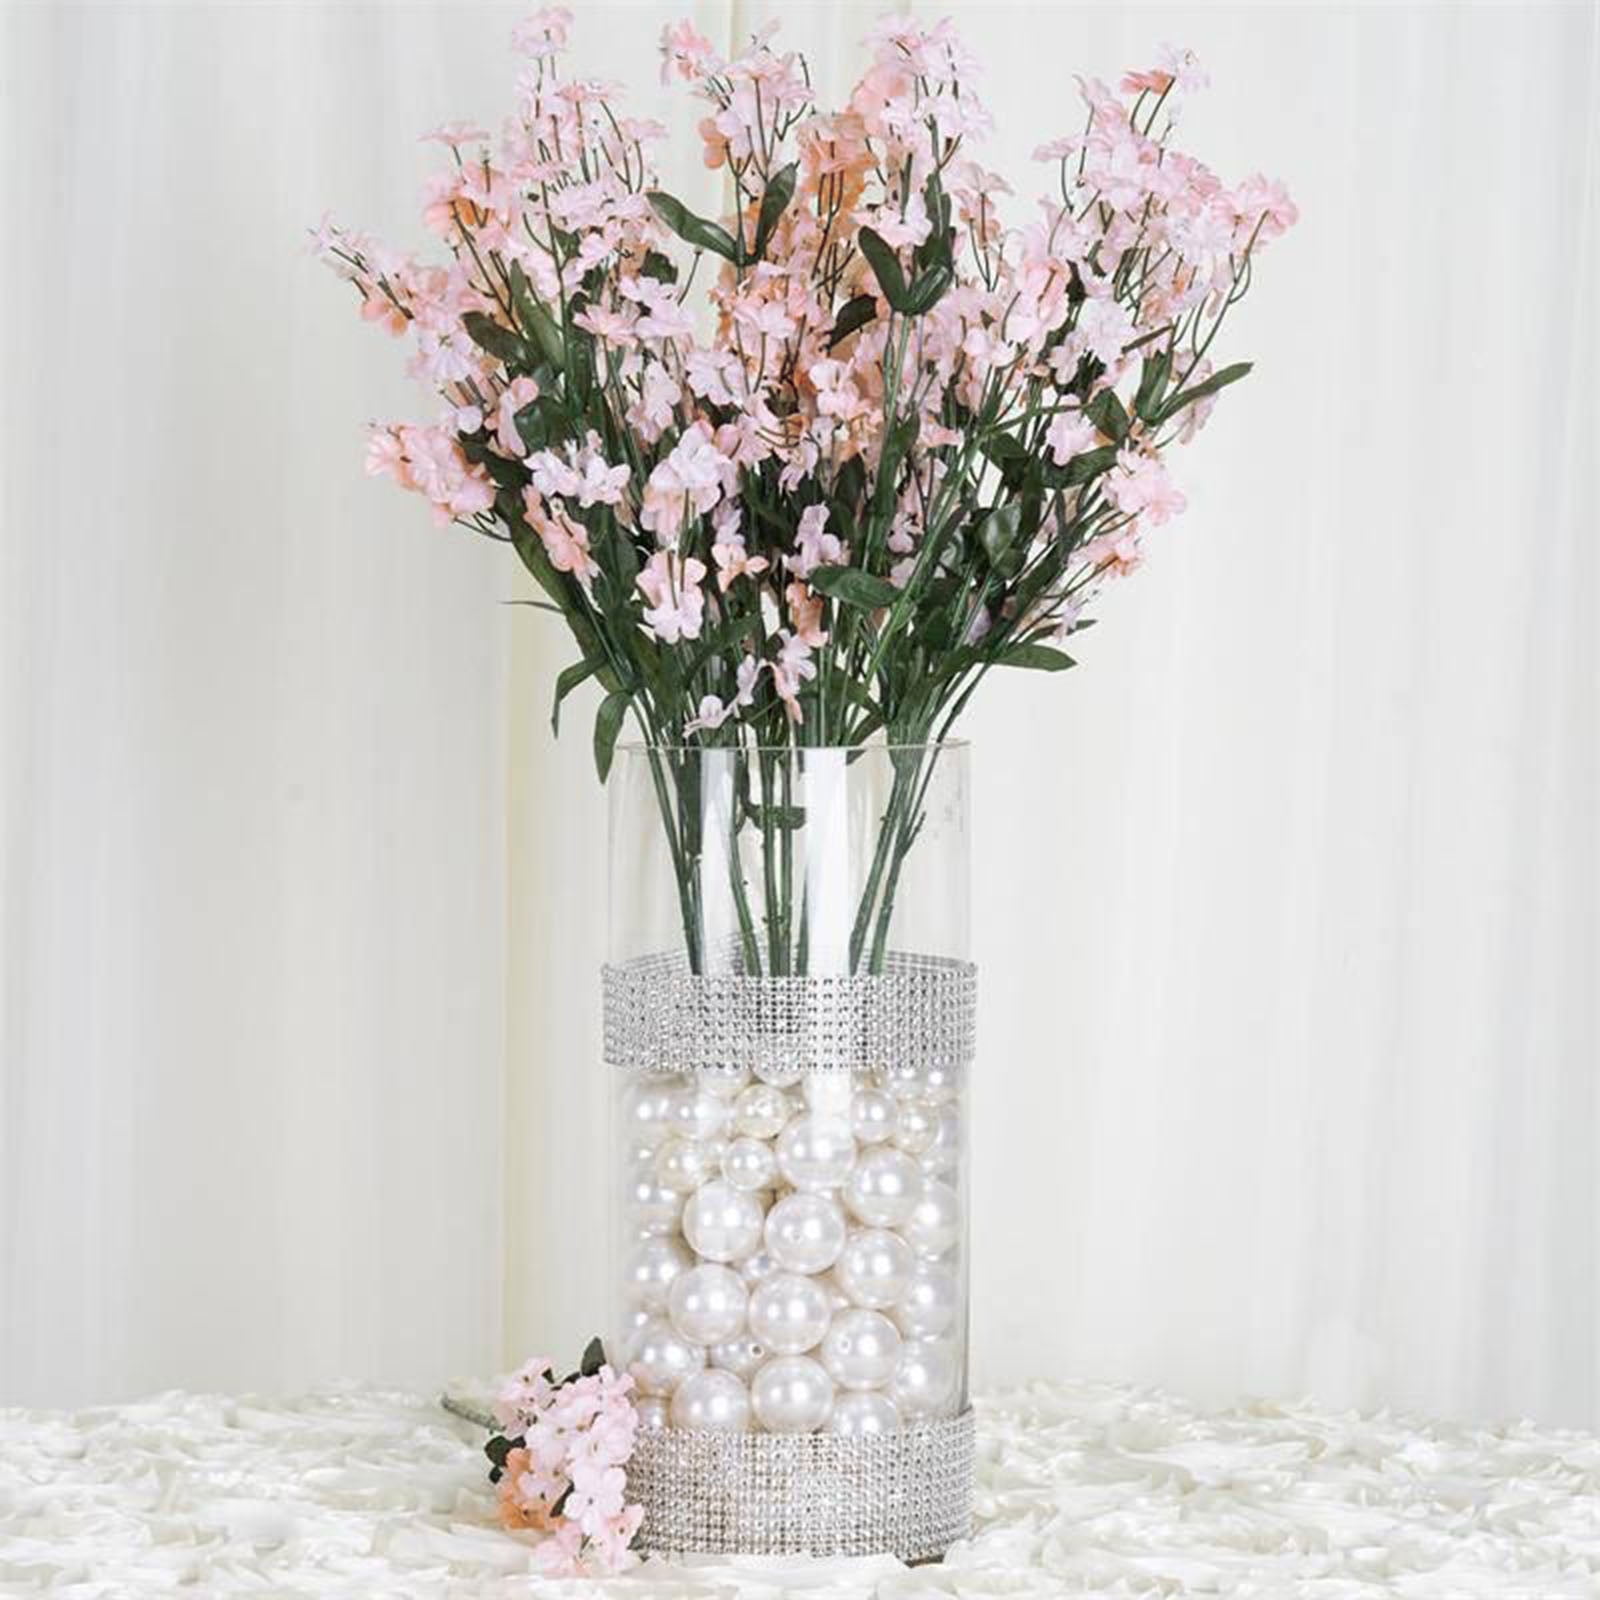 Efavormart 12 bushes BABY BREATH Artificial FILLER FLOWERS for DIY Wedding  Bouquets Centerpieces Party Home Decoration - White